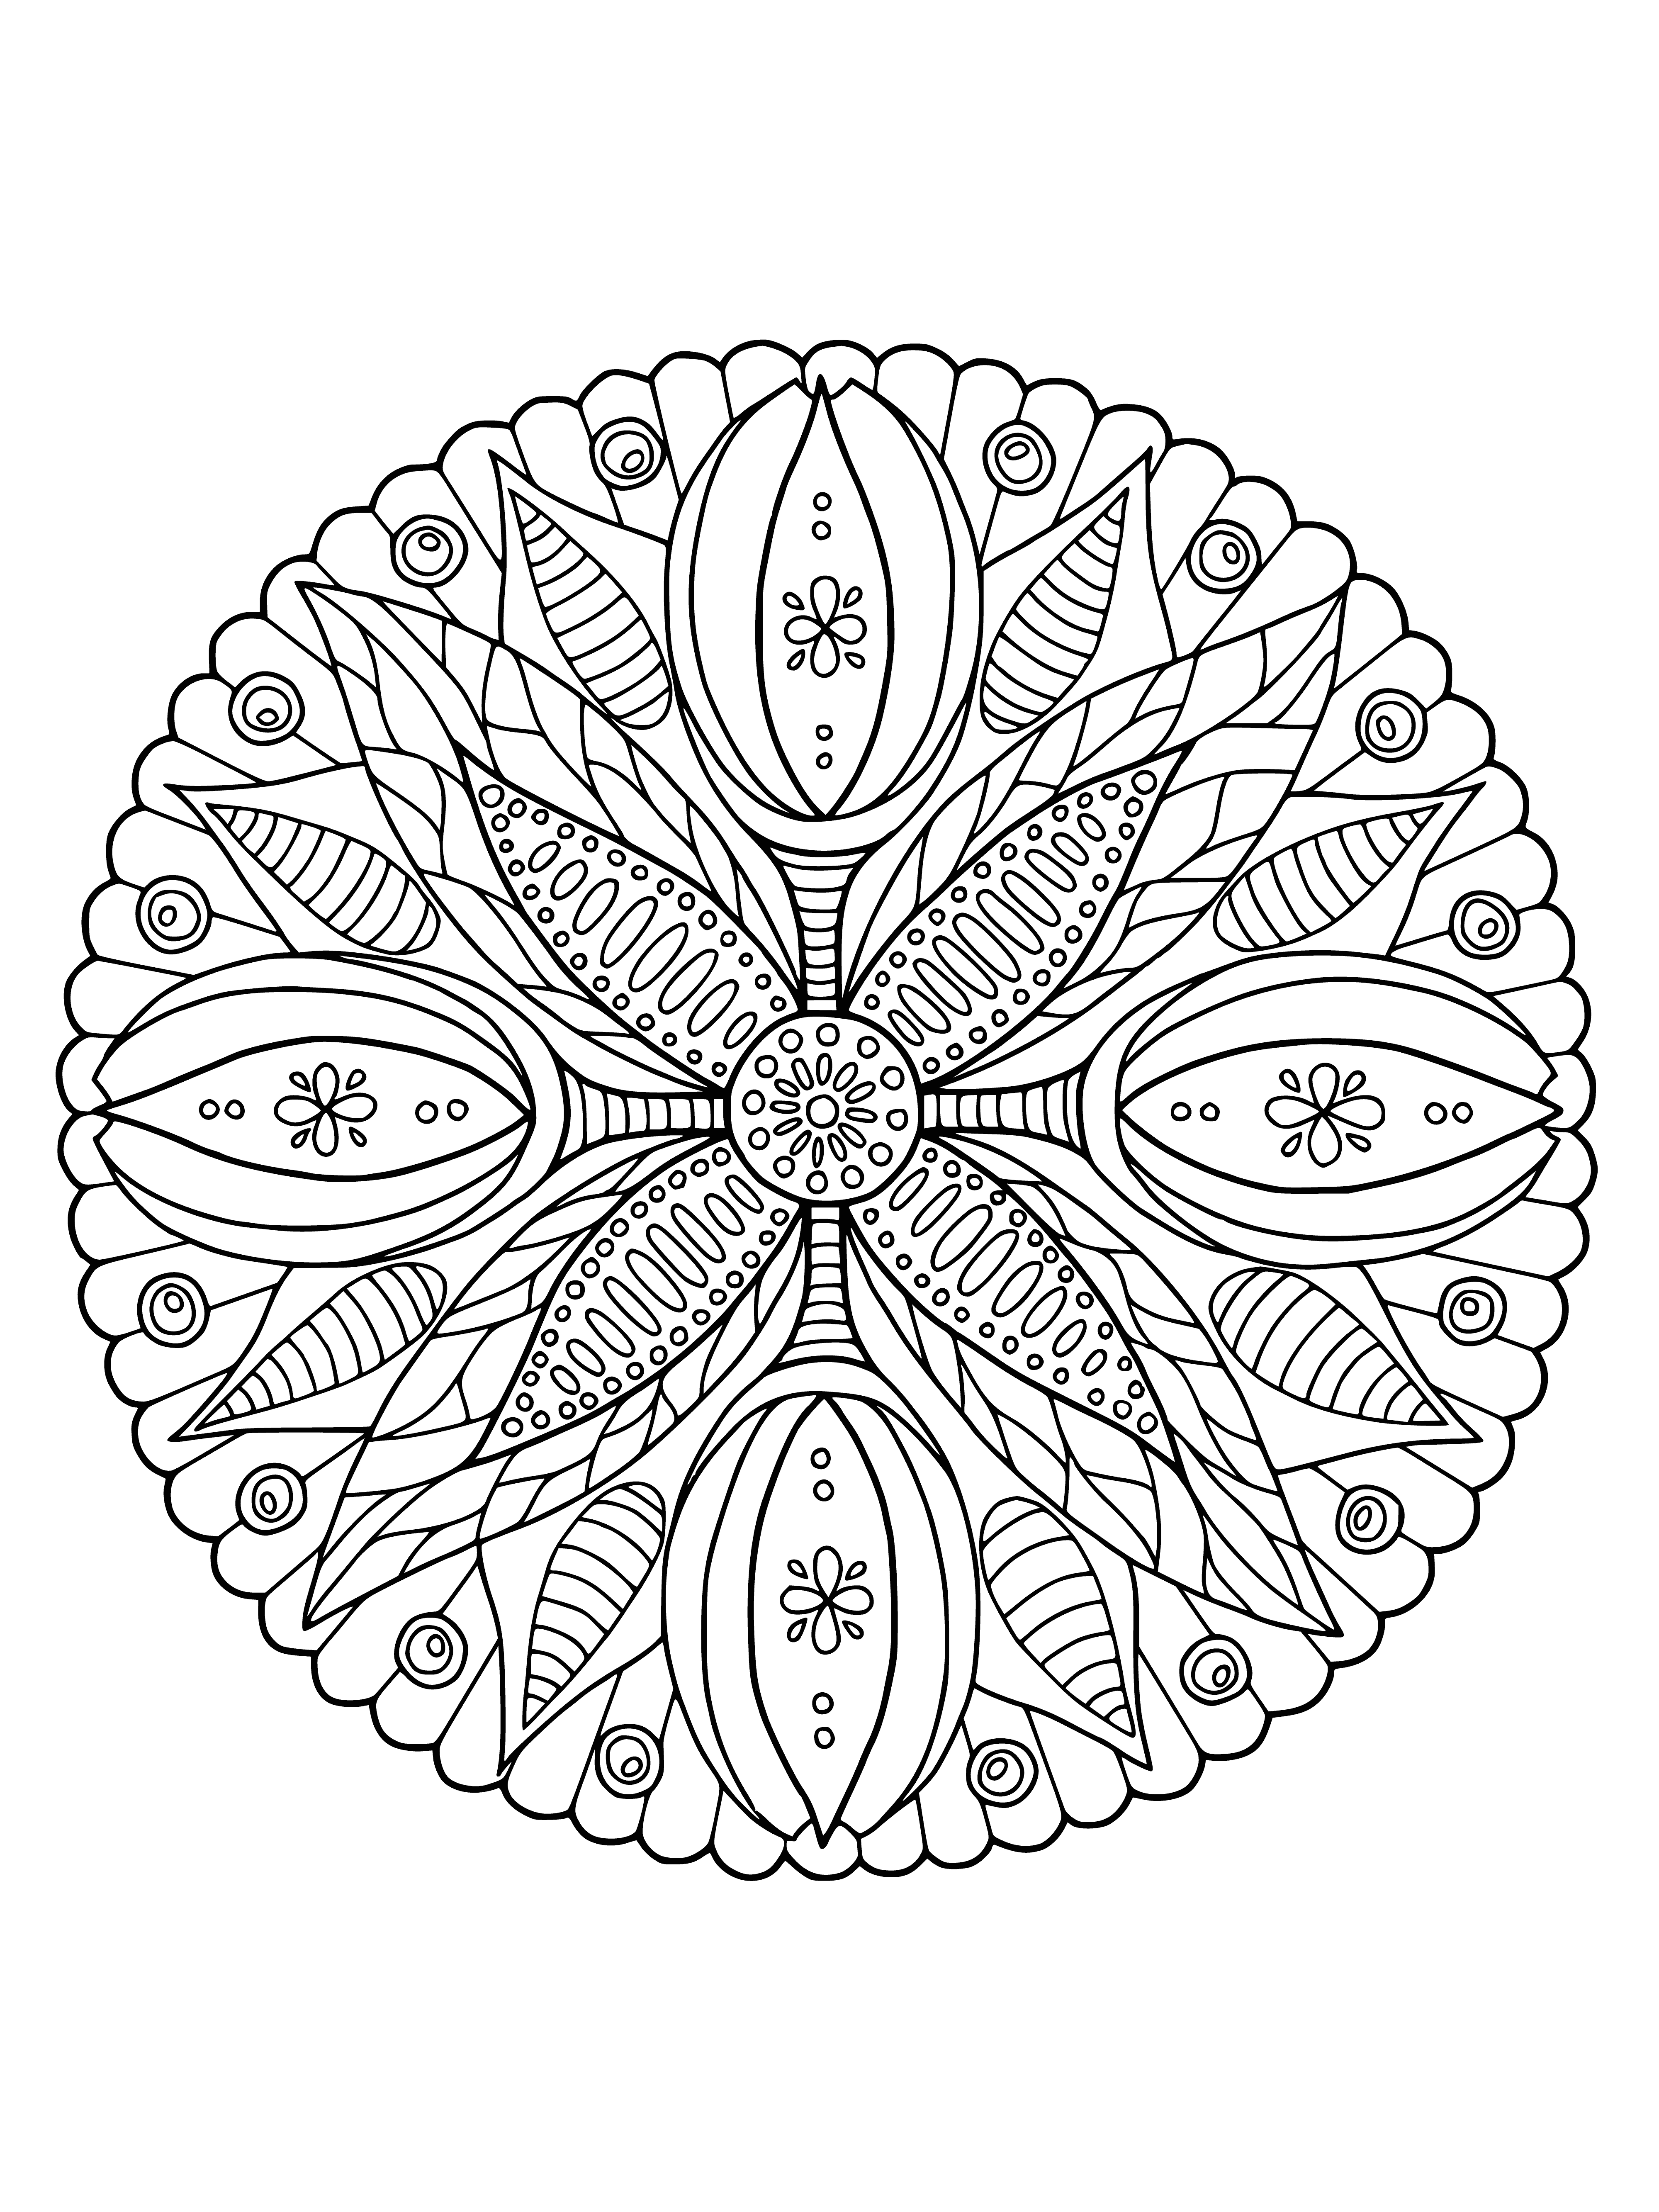 coloring page: Easter mandala has cross in center, surrounded by Easter eggs, bunny rabbits, and a frame of flowers. #Easter #Mandala